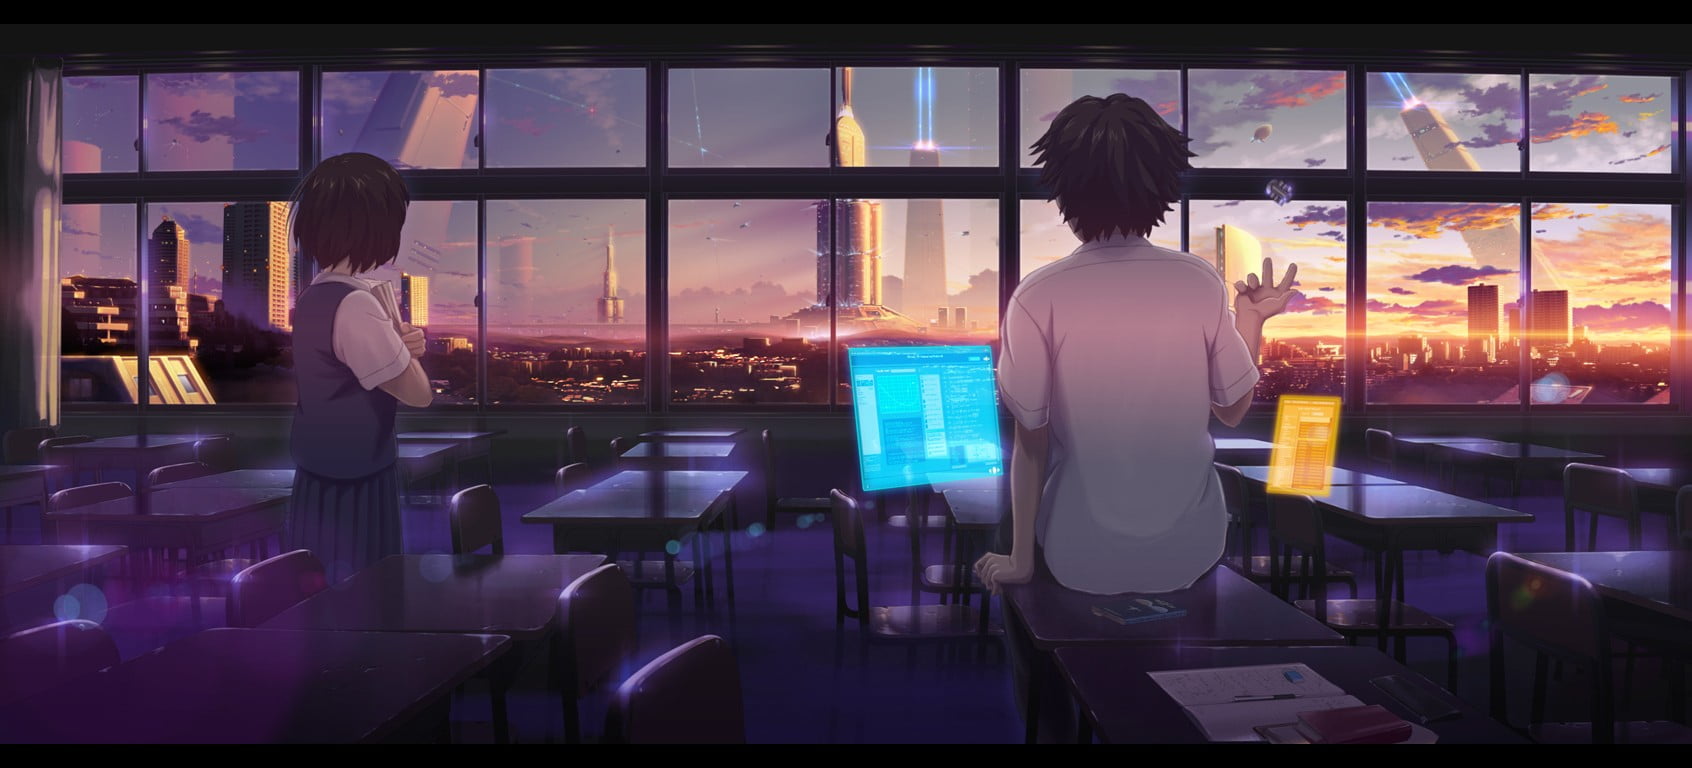 Two Anime Characters Facing Window During Daytime Hd Wallpaper Wallpaper Flare How to draw anime boy in side view/anime drawing tutorial for beginnersfb: two anime characters facing window